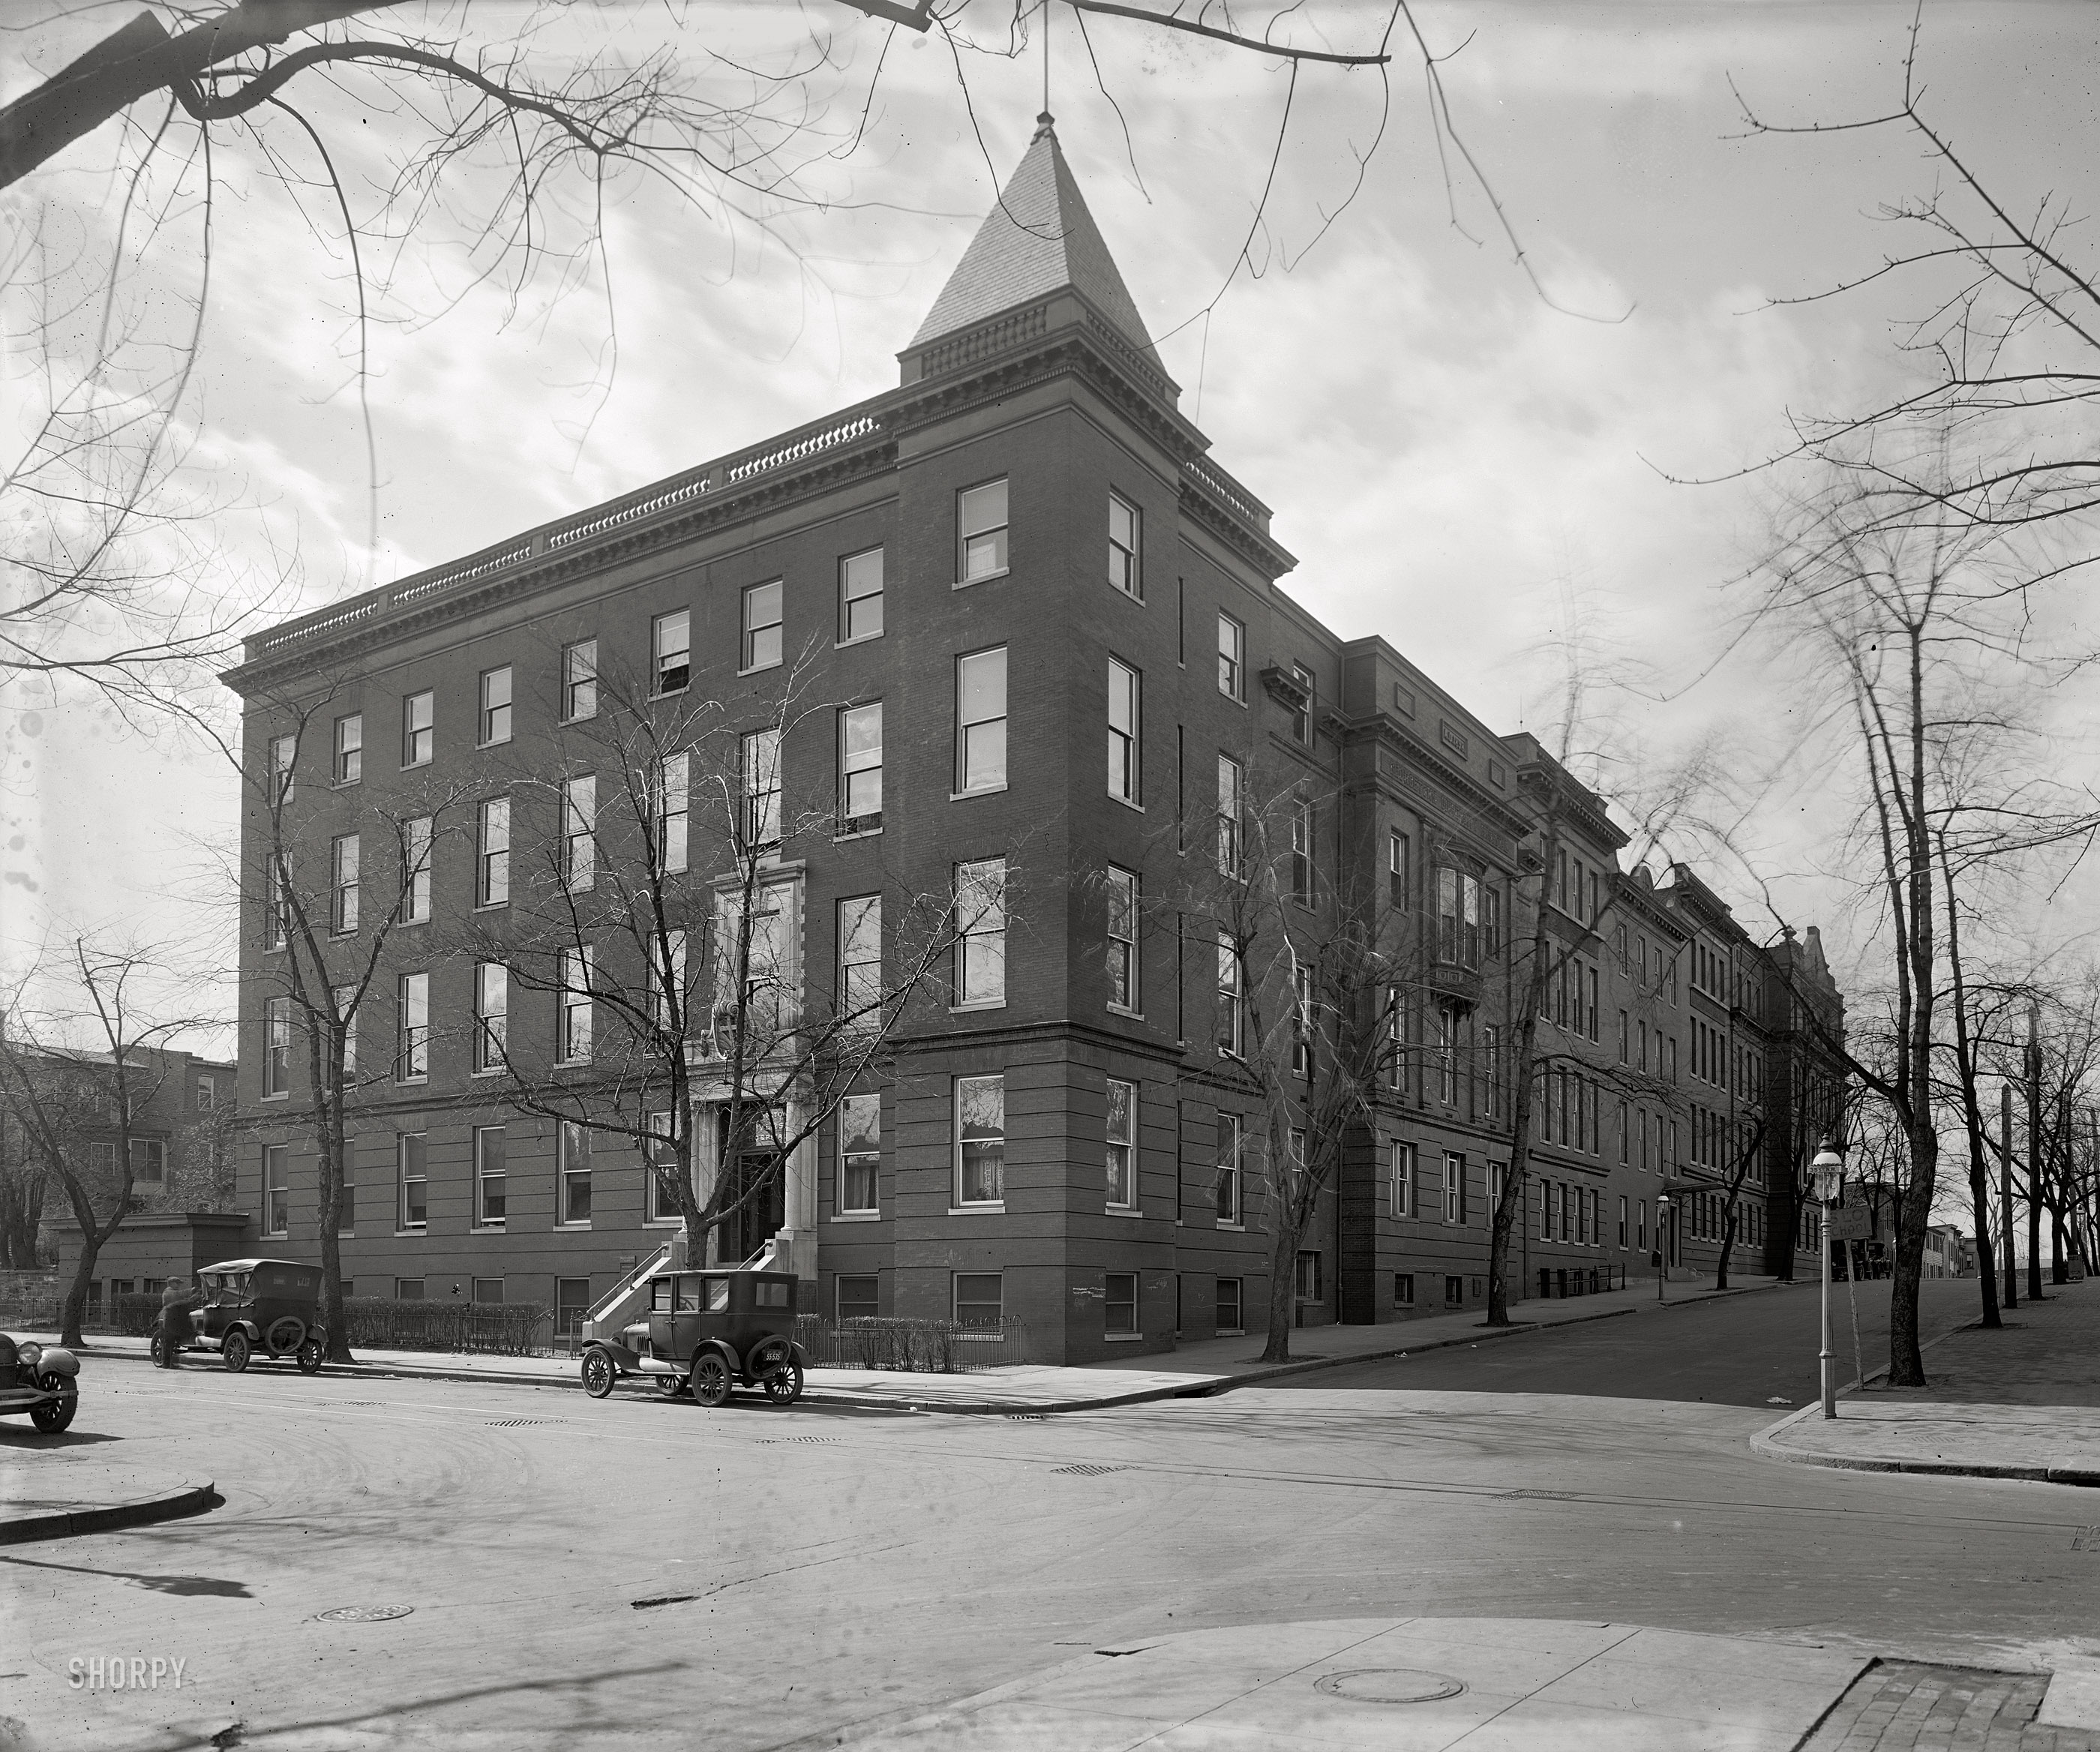 Georgetown University Hospital, 35th Street N.W. in Washington, circa 1924. National Photo Company Collection glass negative. View full size.